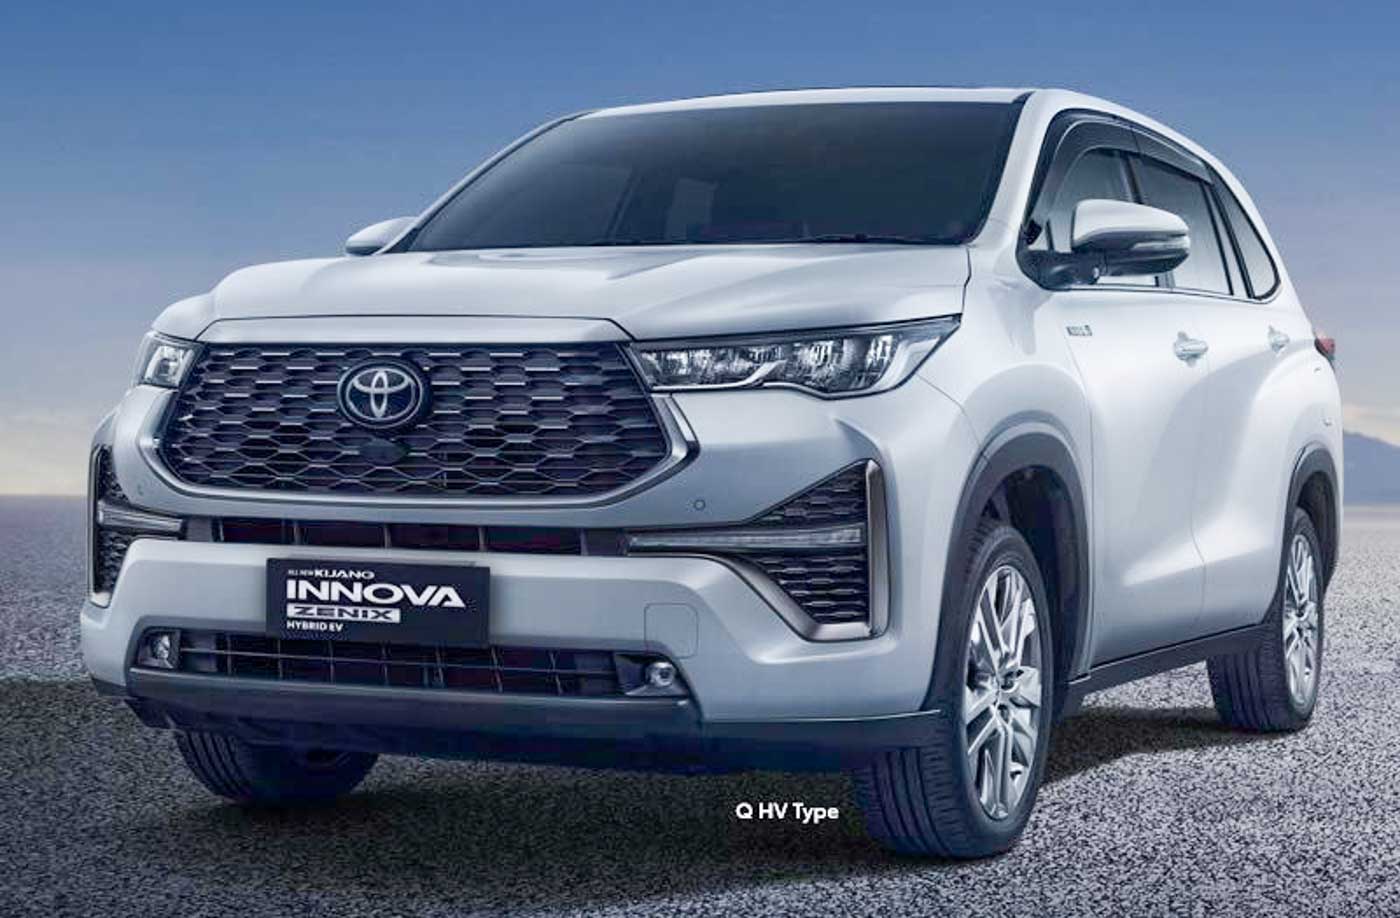 2023 Toyota Innova Hycross Exterior And Interior Leaked Ahead Of Debut